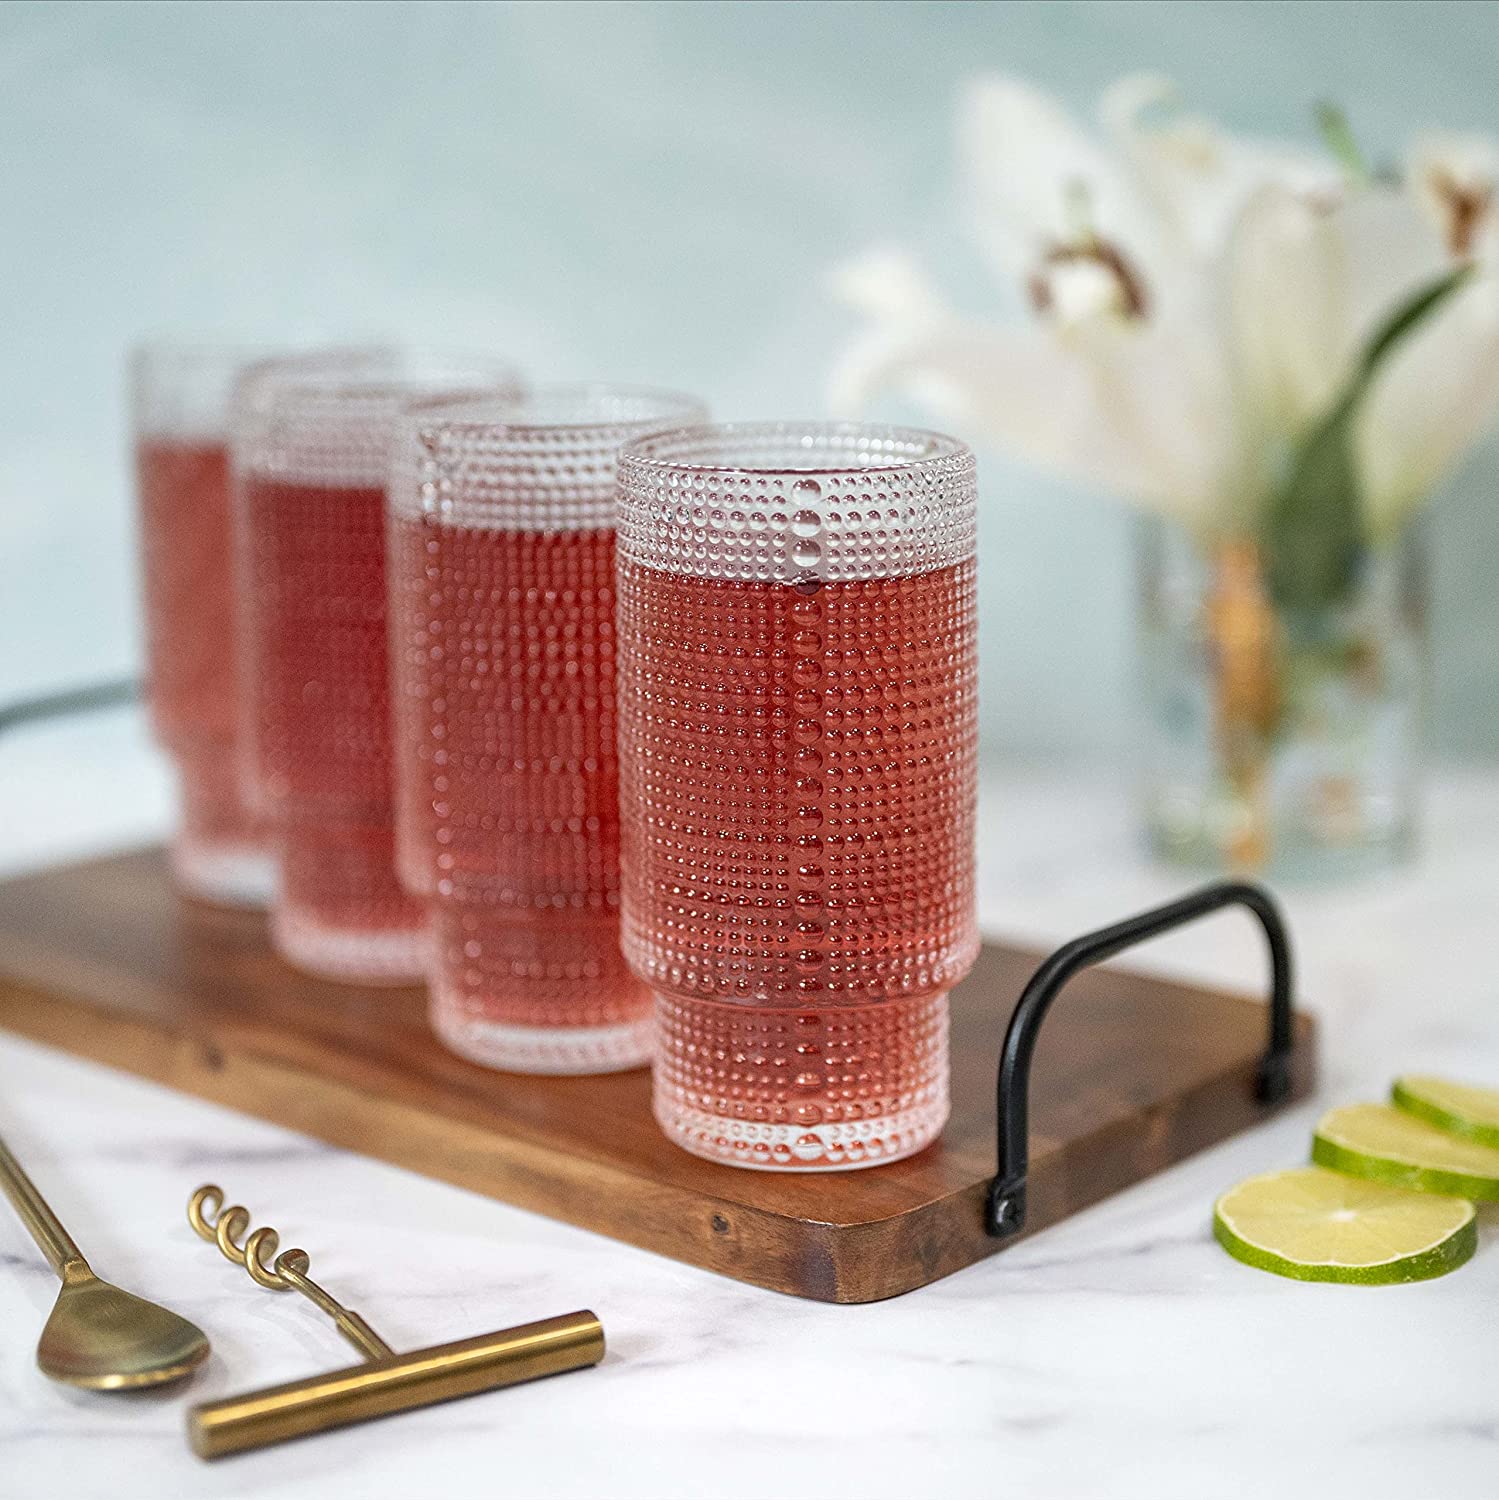 4pcs, 16oz Hobnail Drinking Glasses With Glass Straws, Stackable Cups For  Bar, Cocktails, And Beverages, Ideal For Iced Coffee, Beer, Juice, And Water